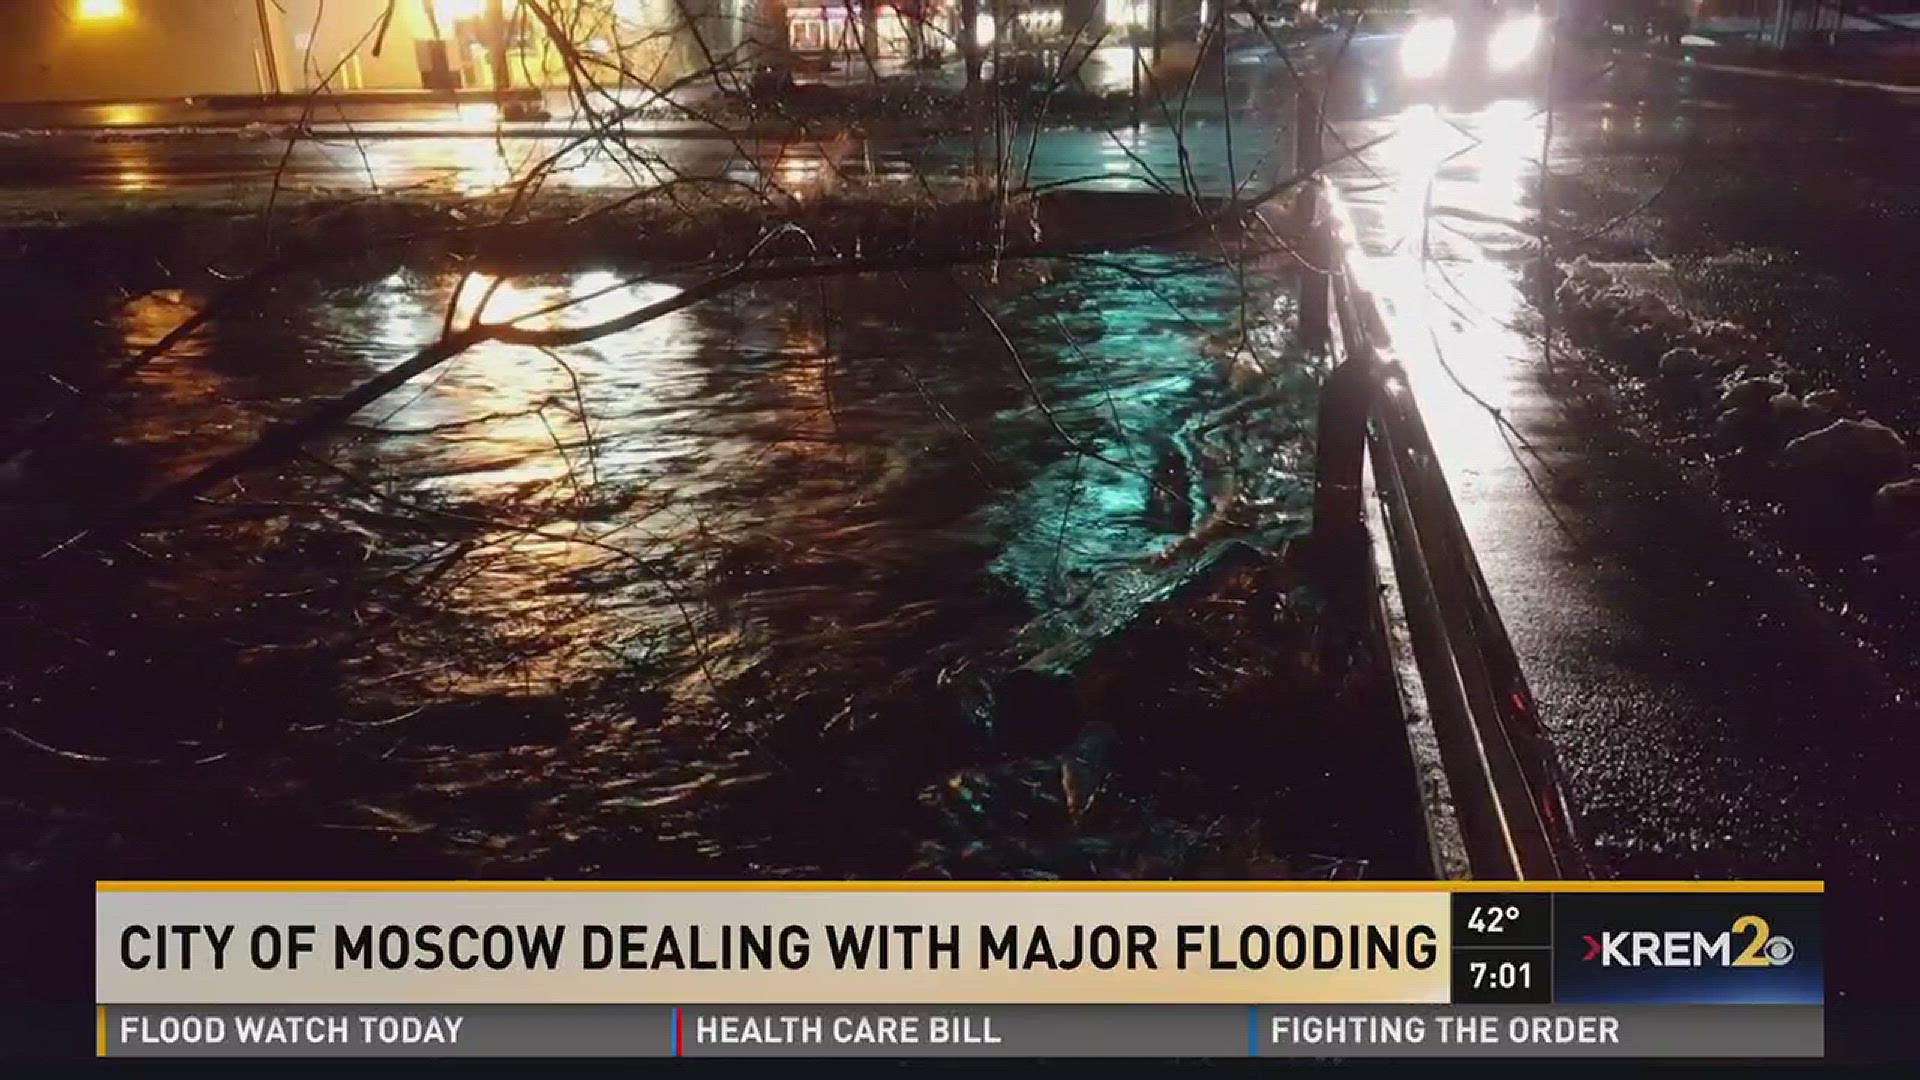 City of Moscow dealing with major flooding